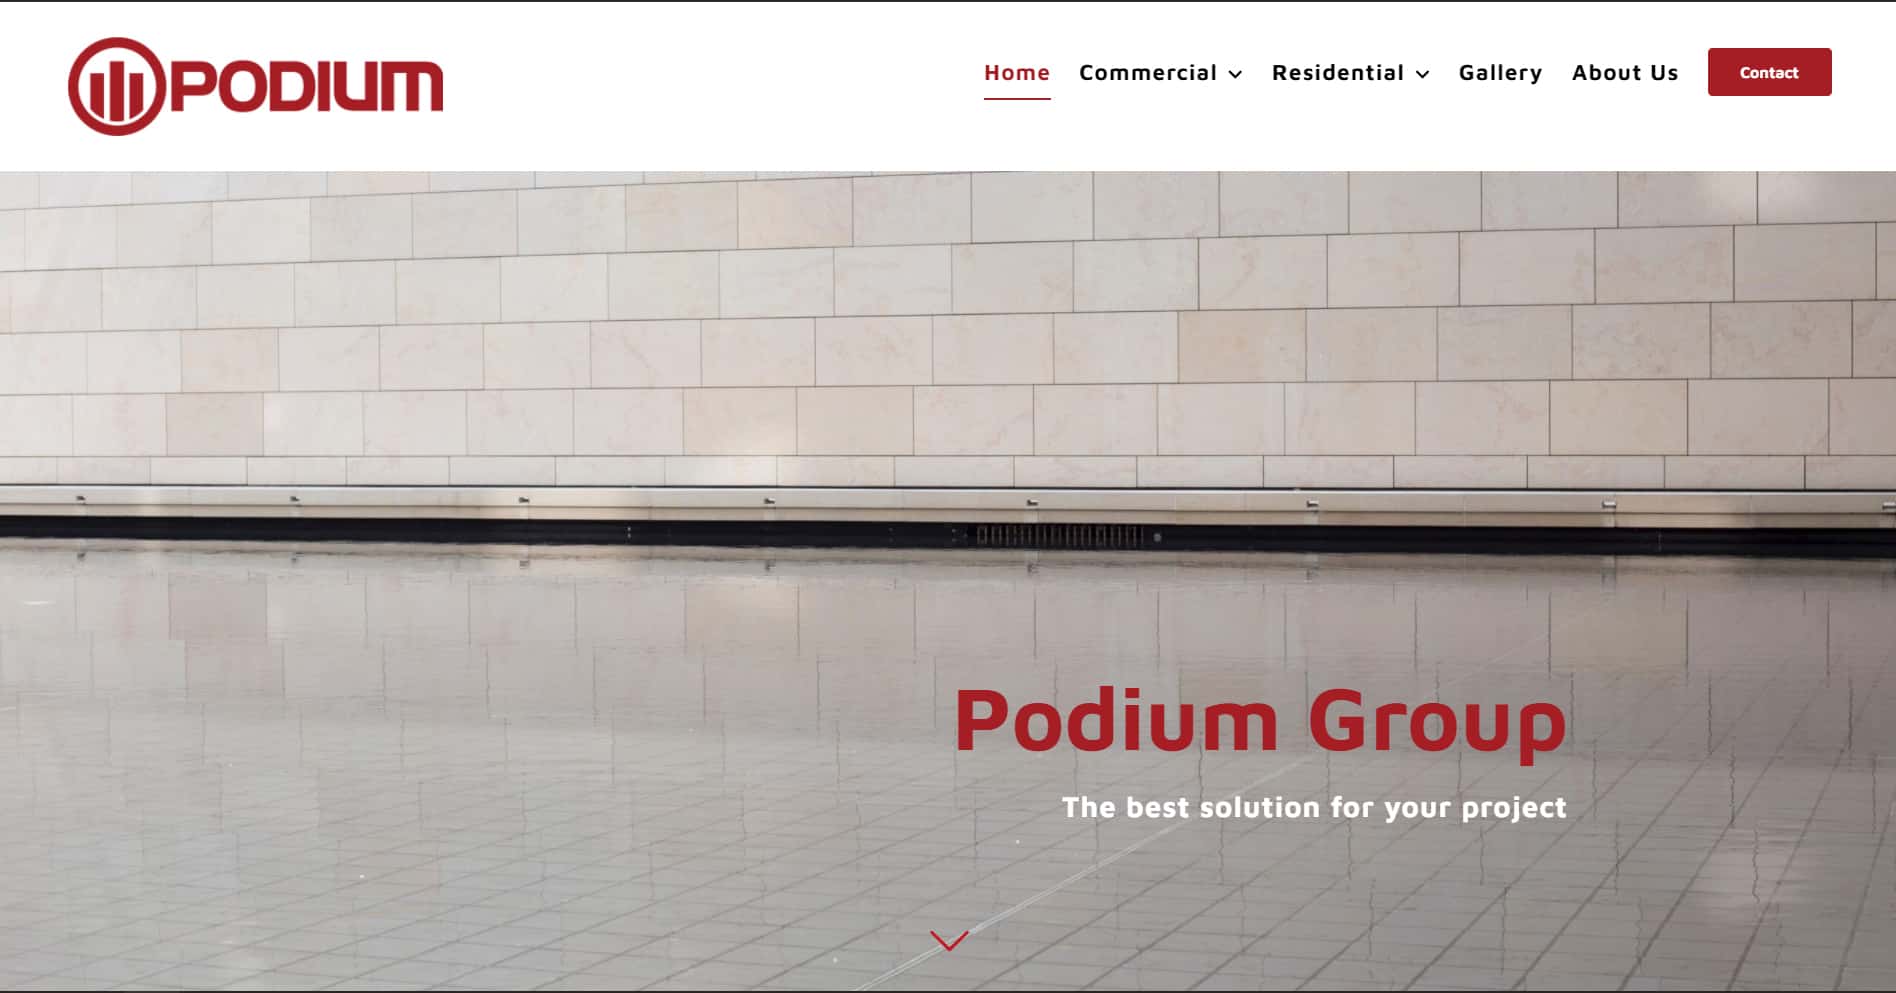 Screenshot of the home page of Podium Group's website